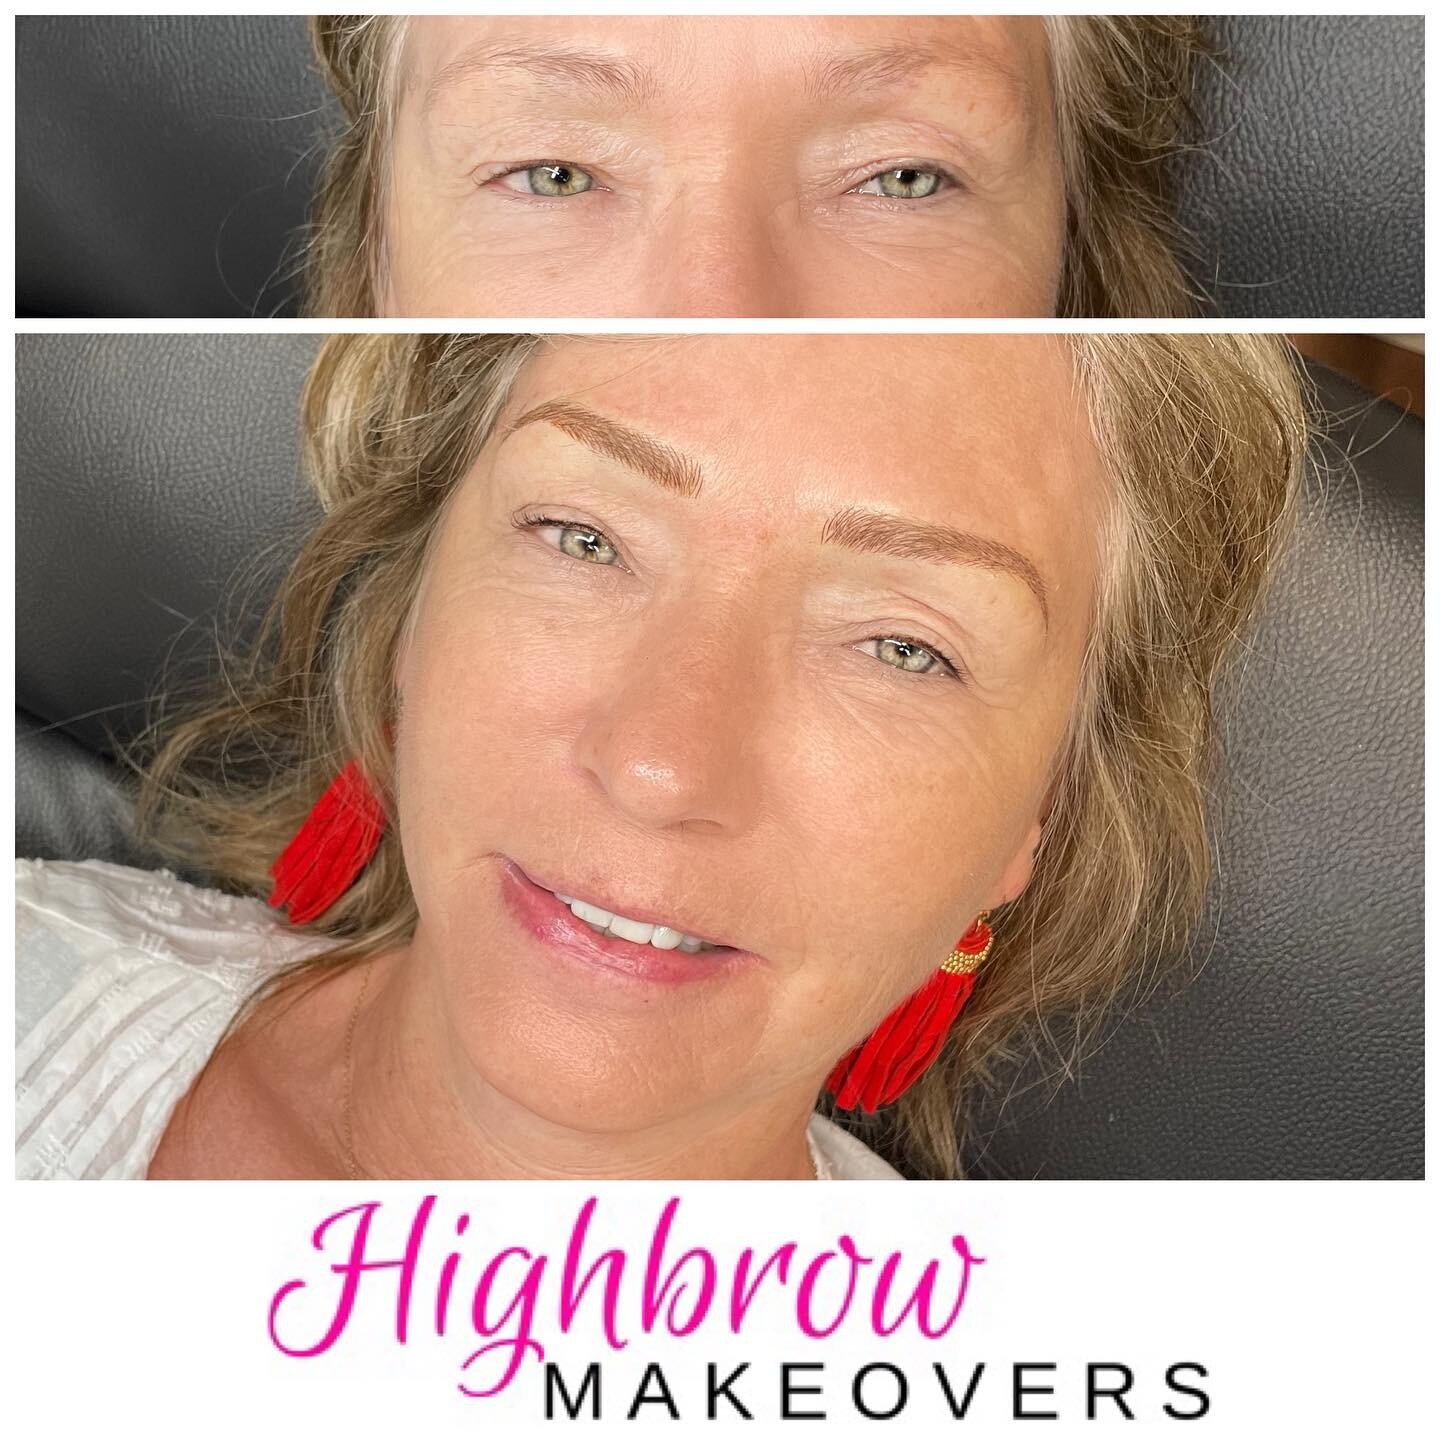 Microblading should suit each individuals needs and that&rsquo;s why it should be custom to fit your bone structure and custom blended to match your hair. I will make sure that just like you, your service is unique to you. Check out highbrowmakeovers